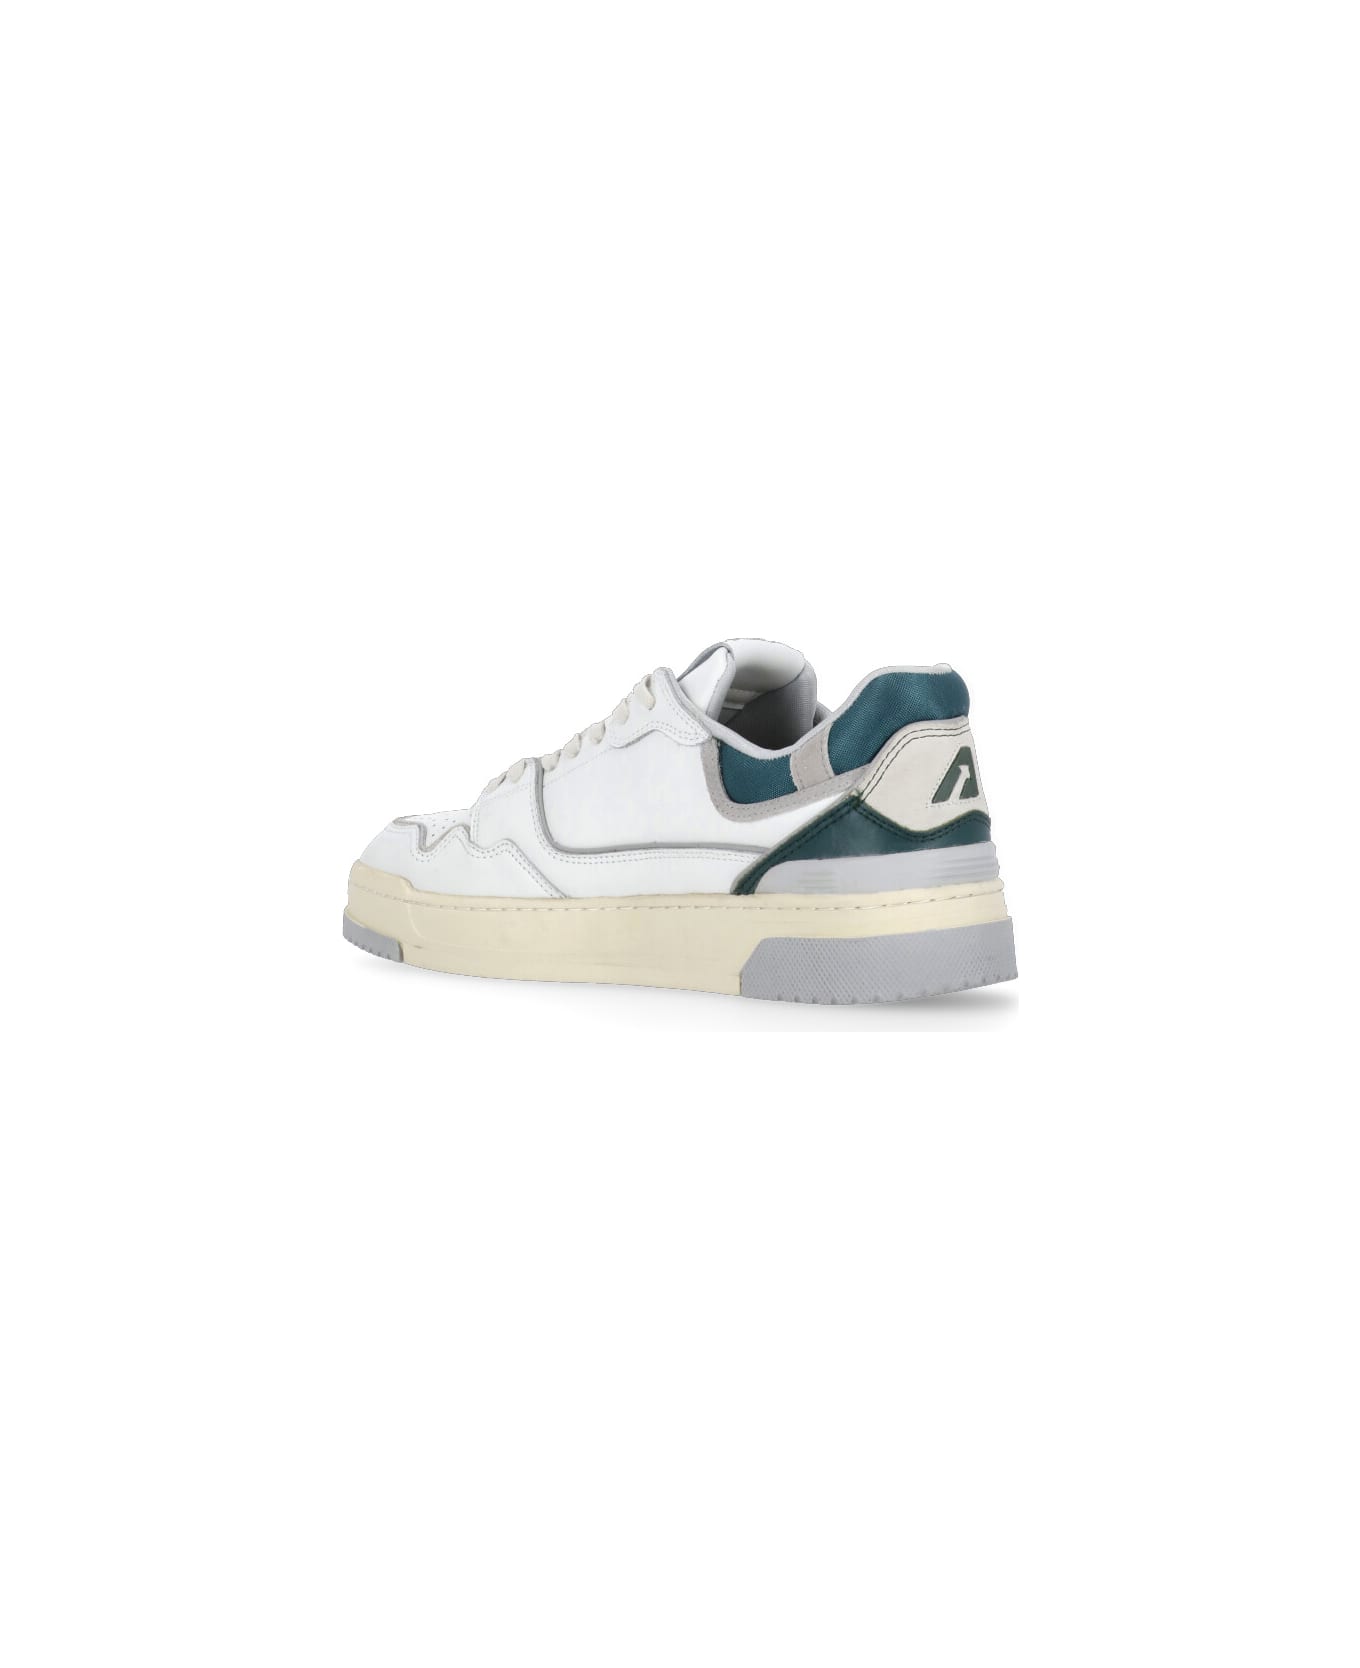 Autry Clc Leather Trainers - White/green スニーカー